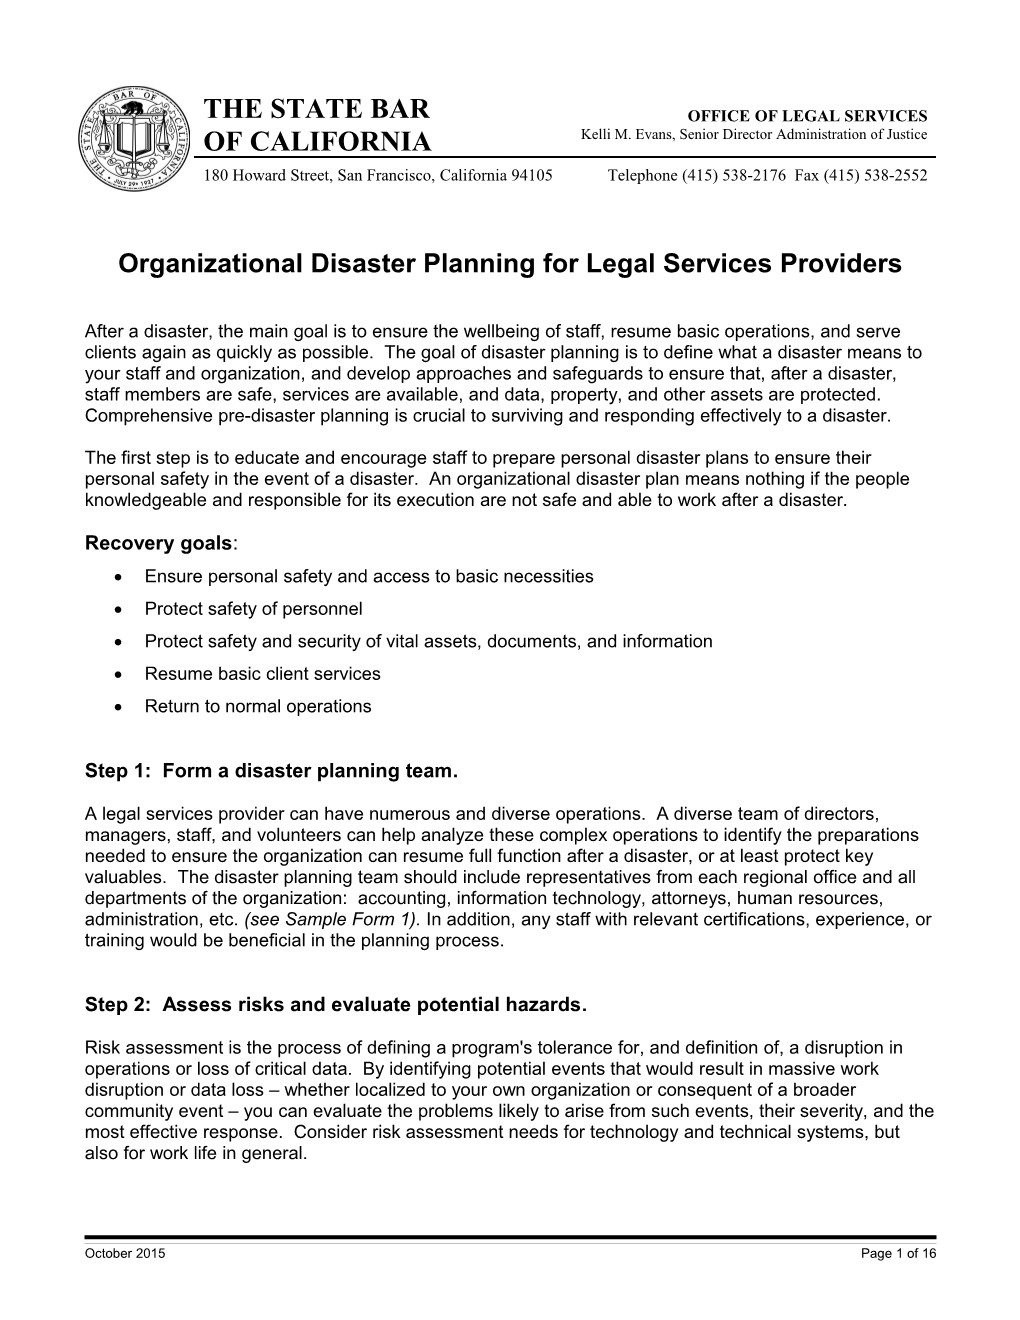 Organizationaldisaster Planning for Legal Services Providers